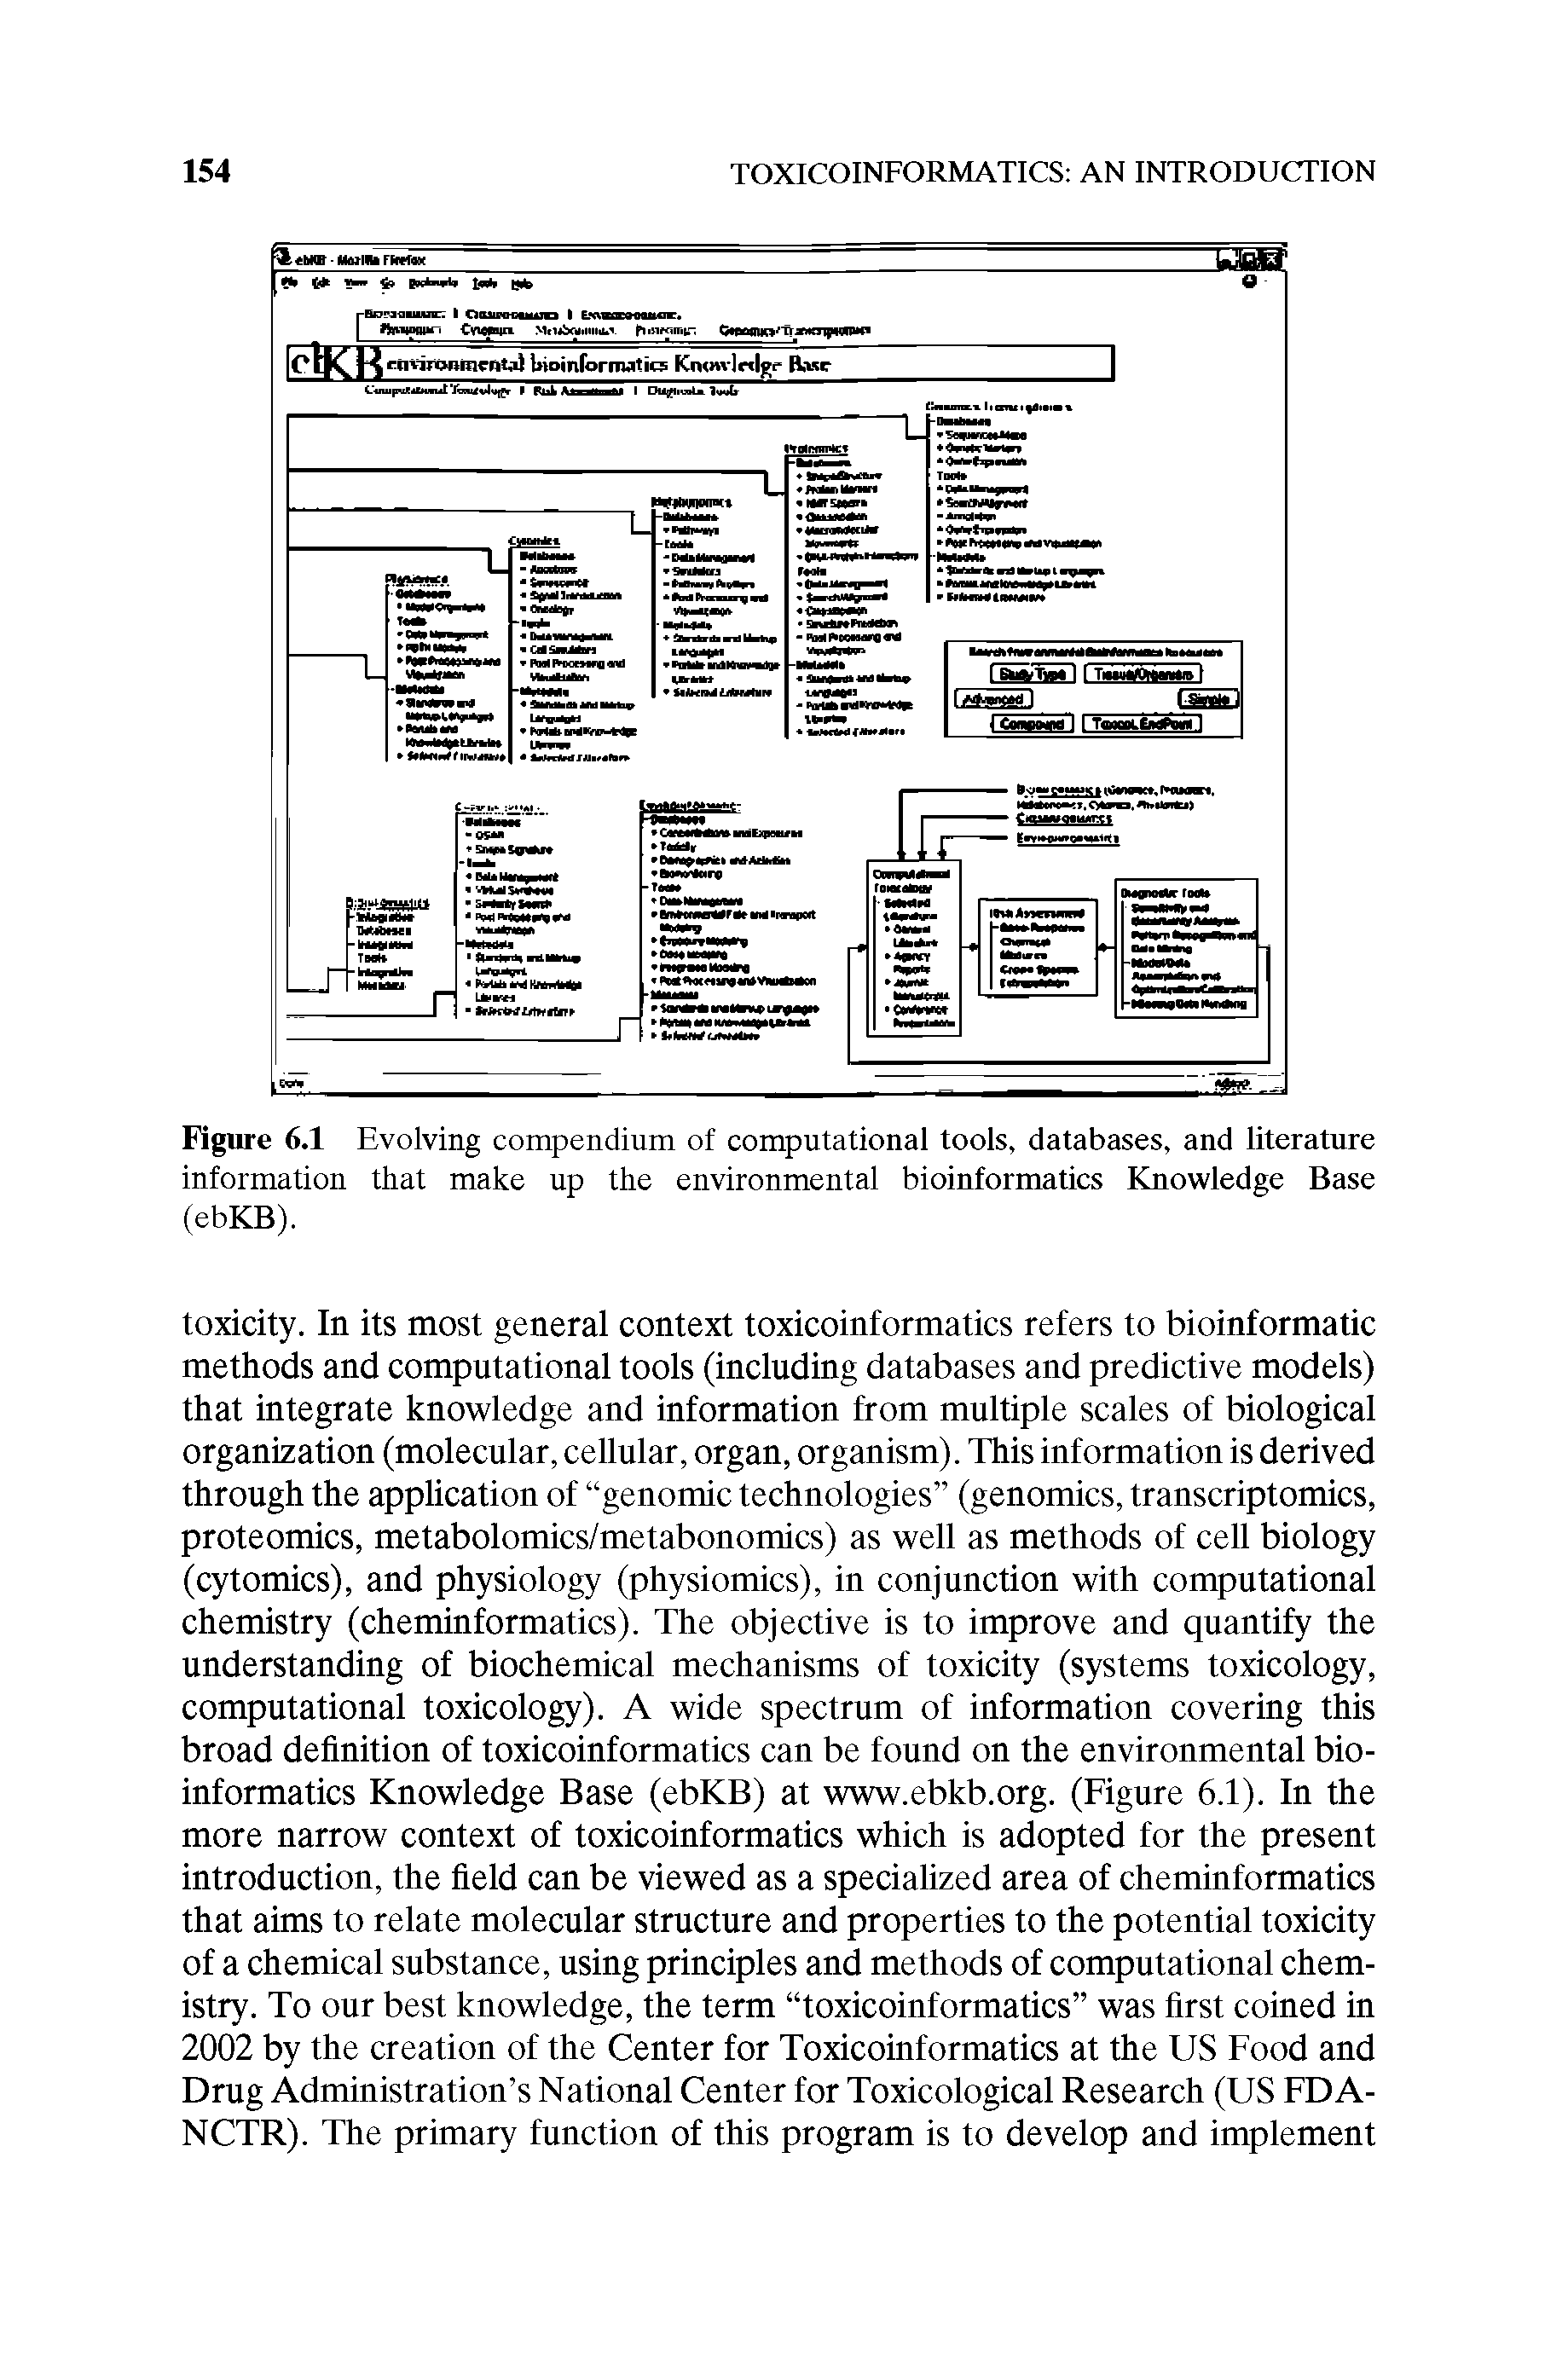 Figure 6.1 Evolving compendium of computational tools, databases, and literature information that make up the environmental bioinformatics Knowledge Base (ebKB).